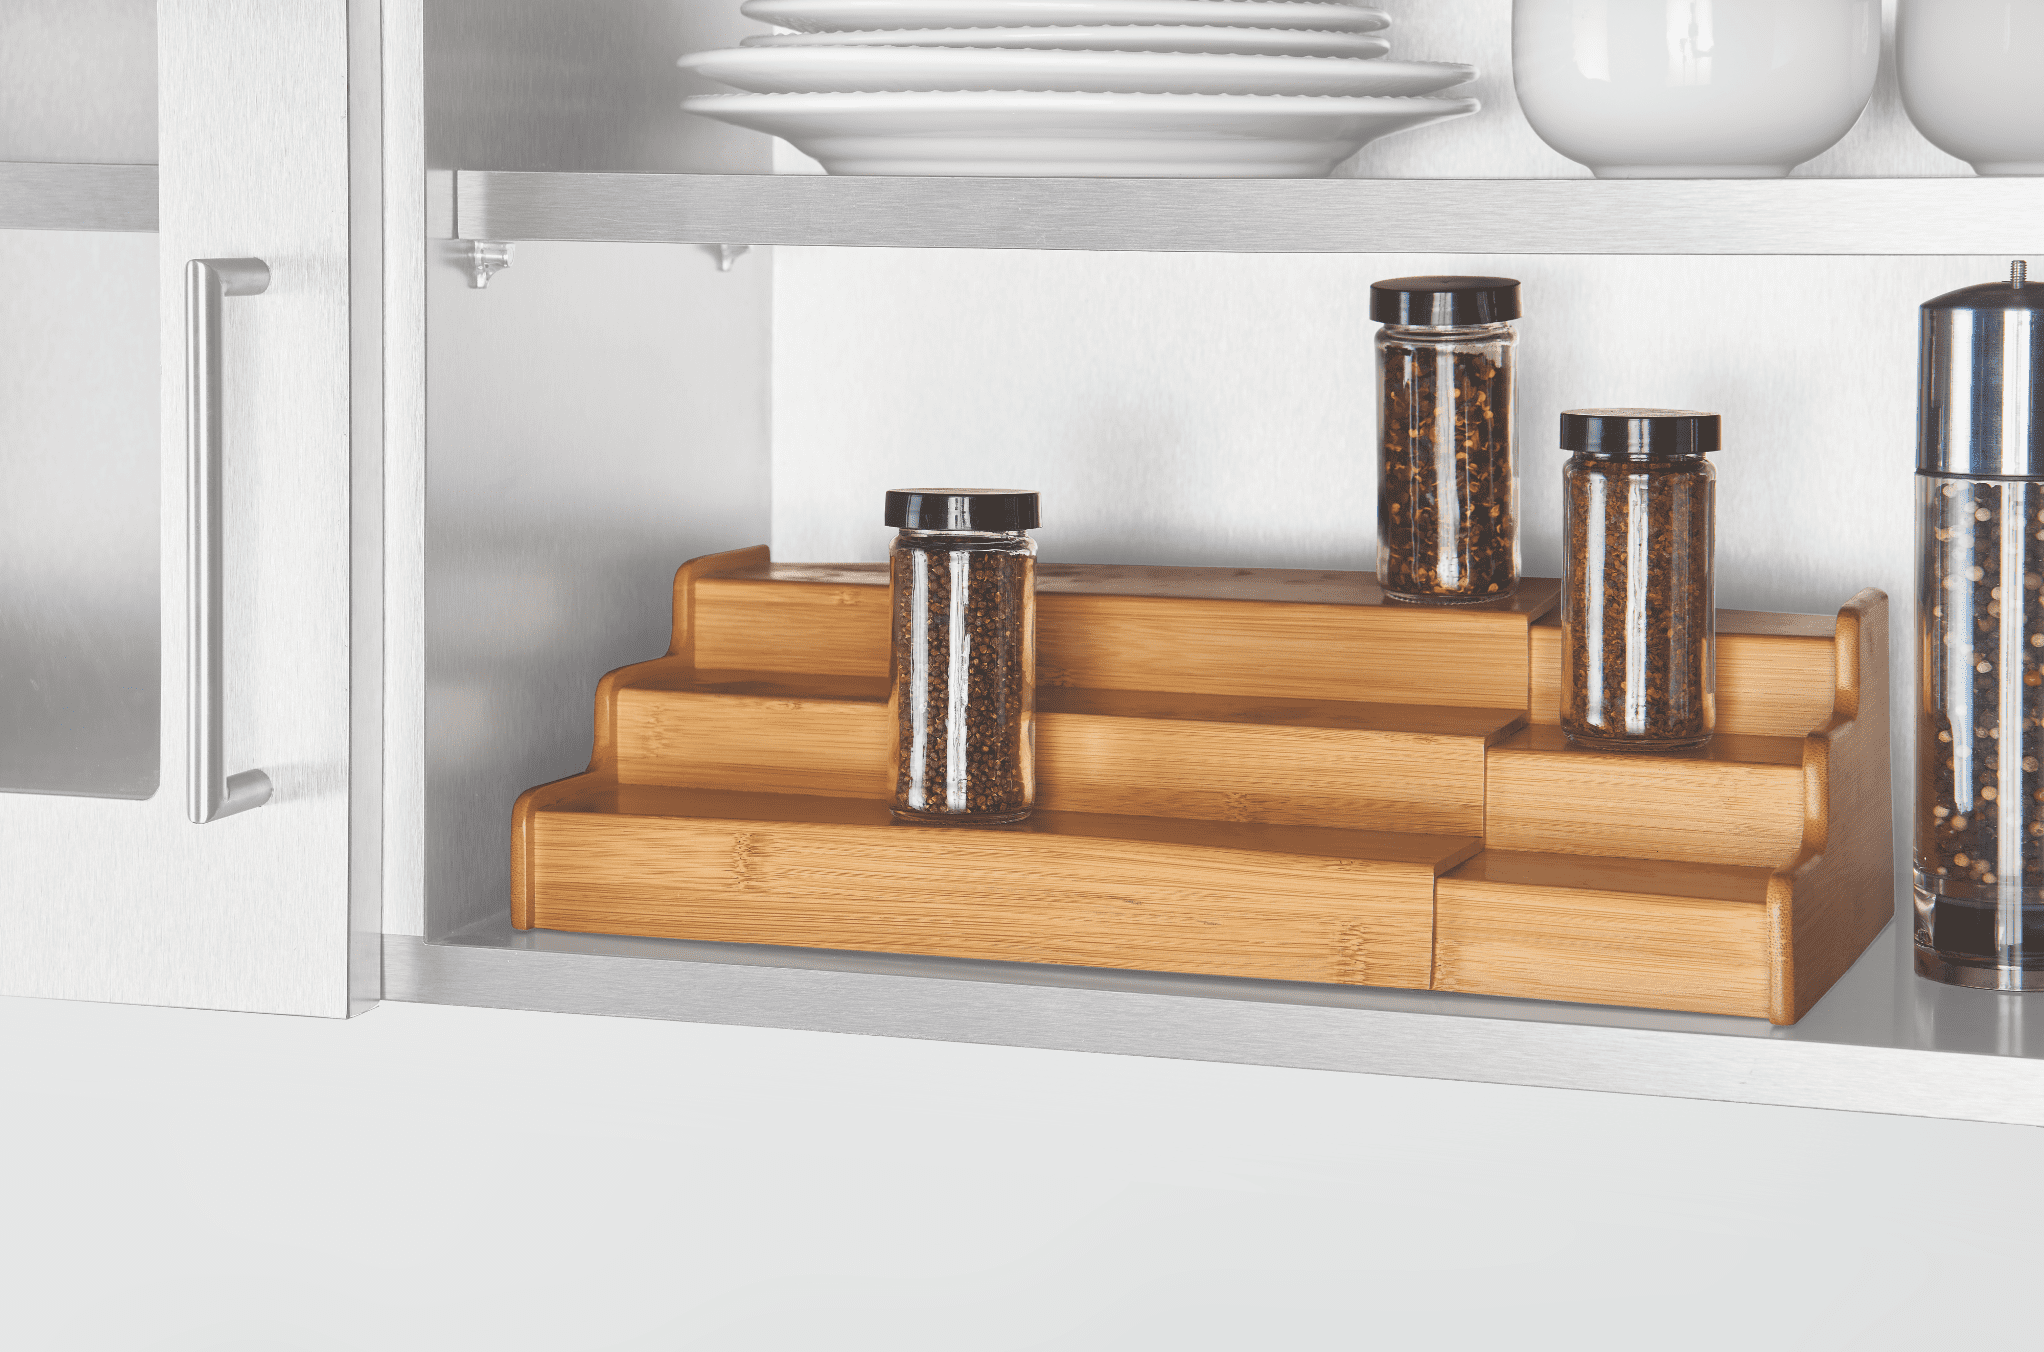 Seville Classics 3-Tier Expandable Bamboo Spice Rack Step Shelf Cabinet Organizer - Brown